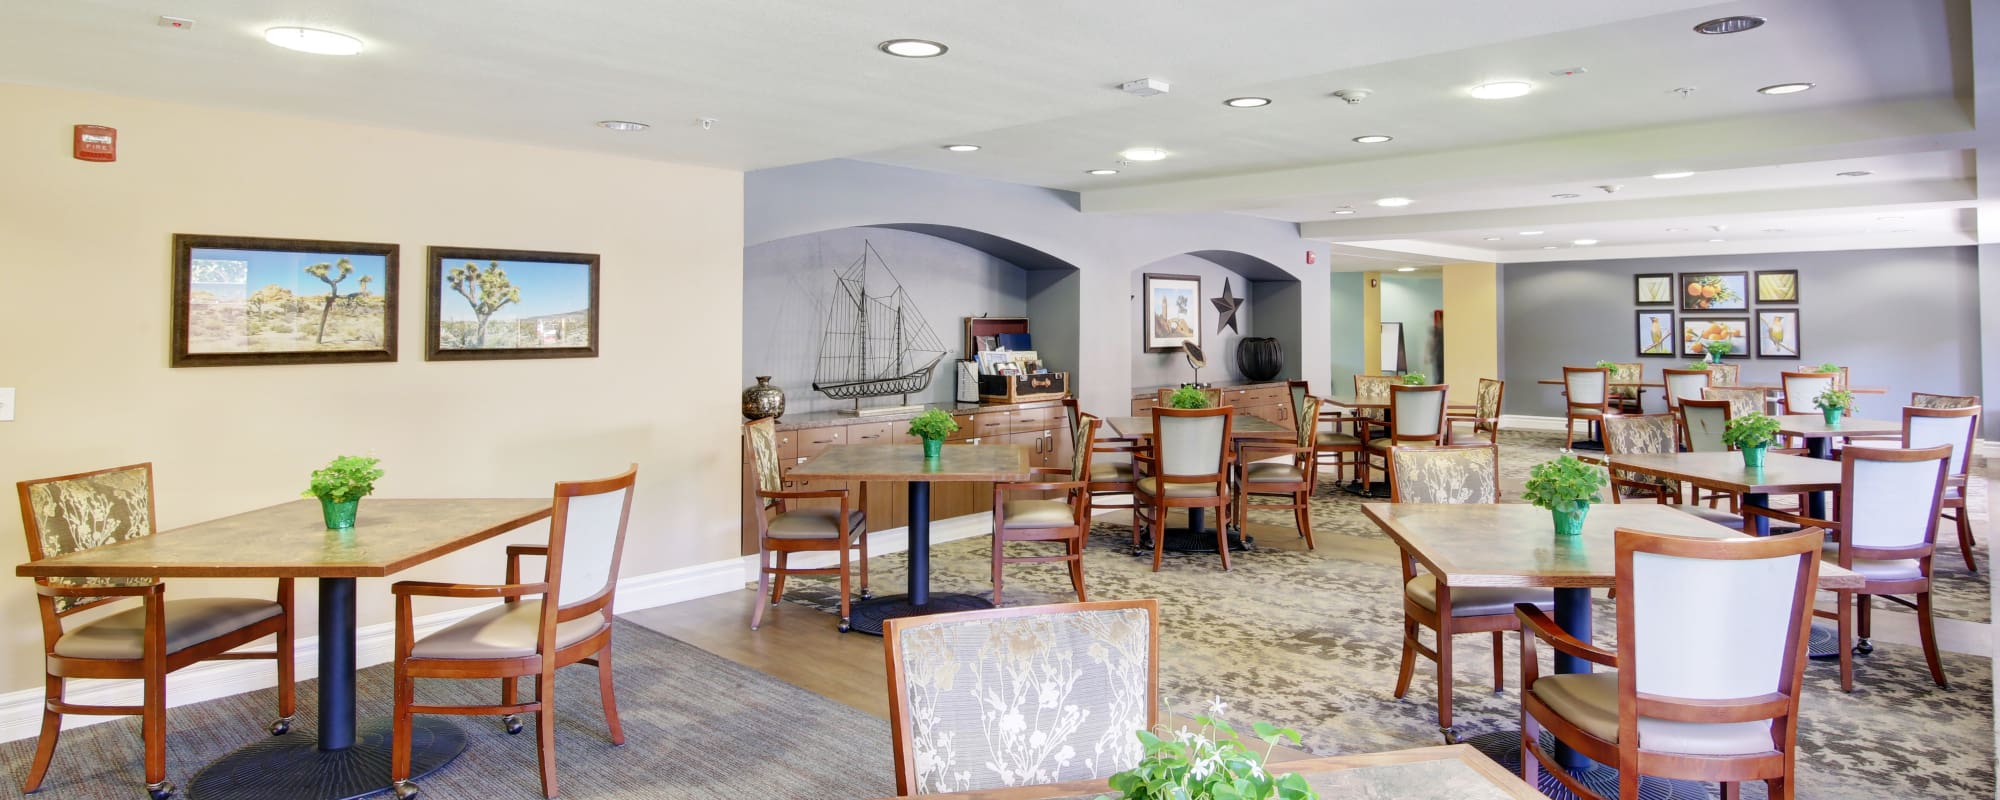 Our senior apartments in Riverside, California offer a dining area